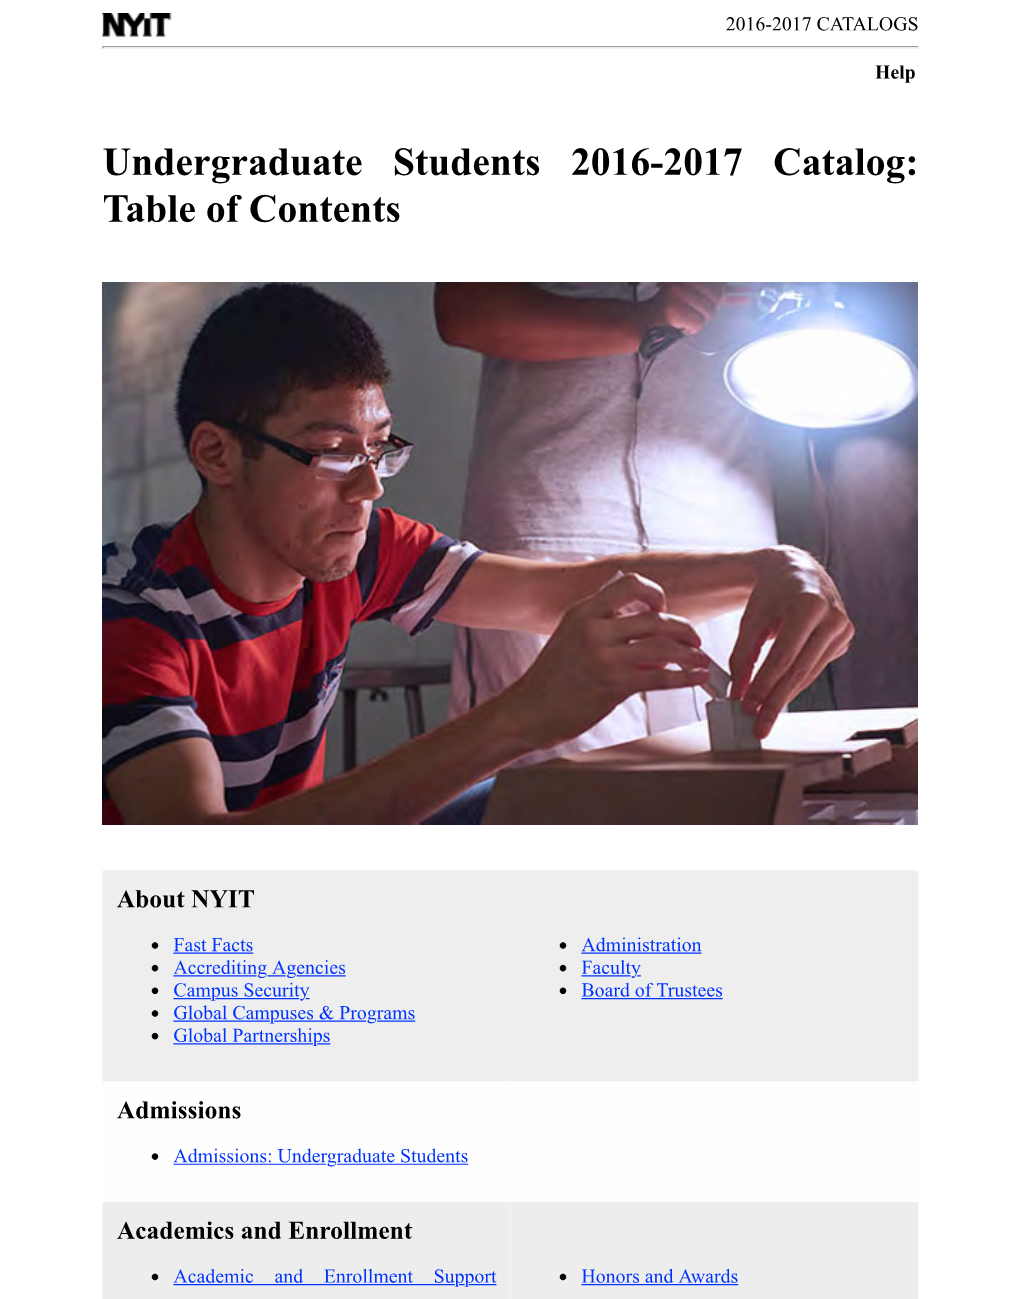 Undergraduate Students 2016-2017 Catalog: Table of Contents